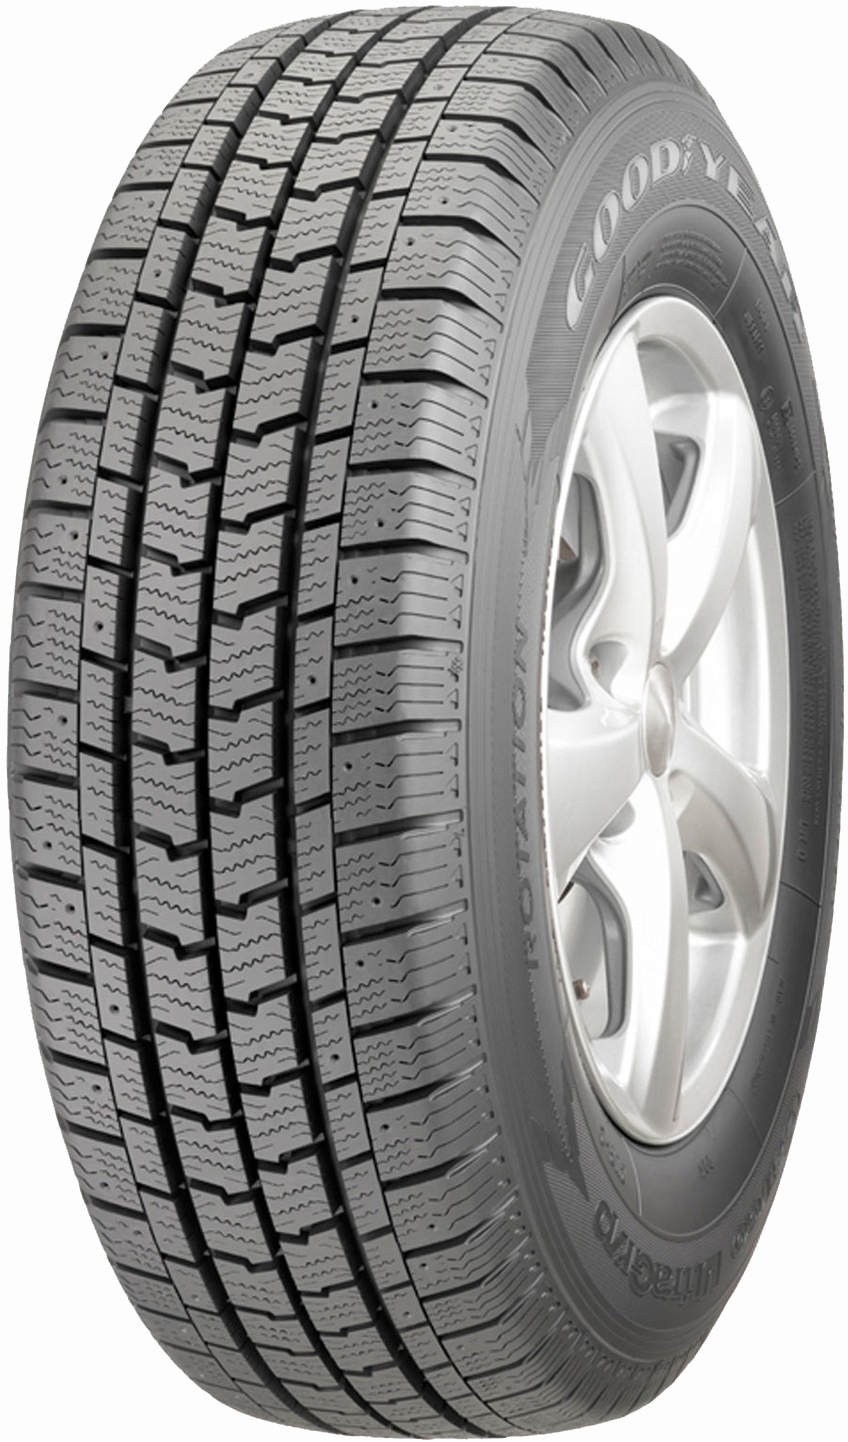 Anvelope microbuz GOODYEAR CARGO ULTRA GRIP 2 195/65 R16 104T